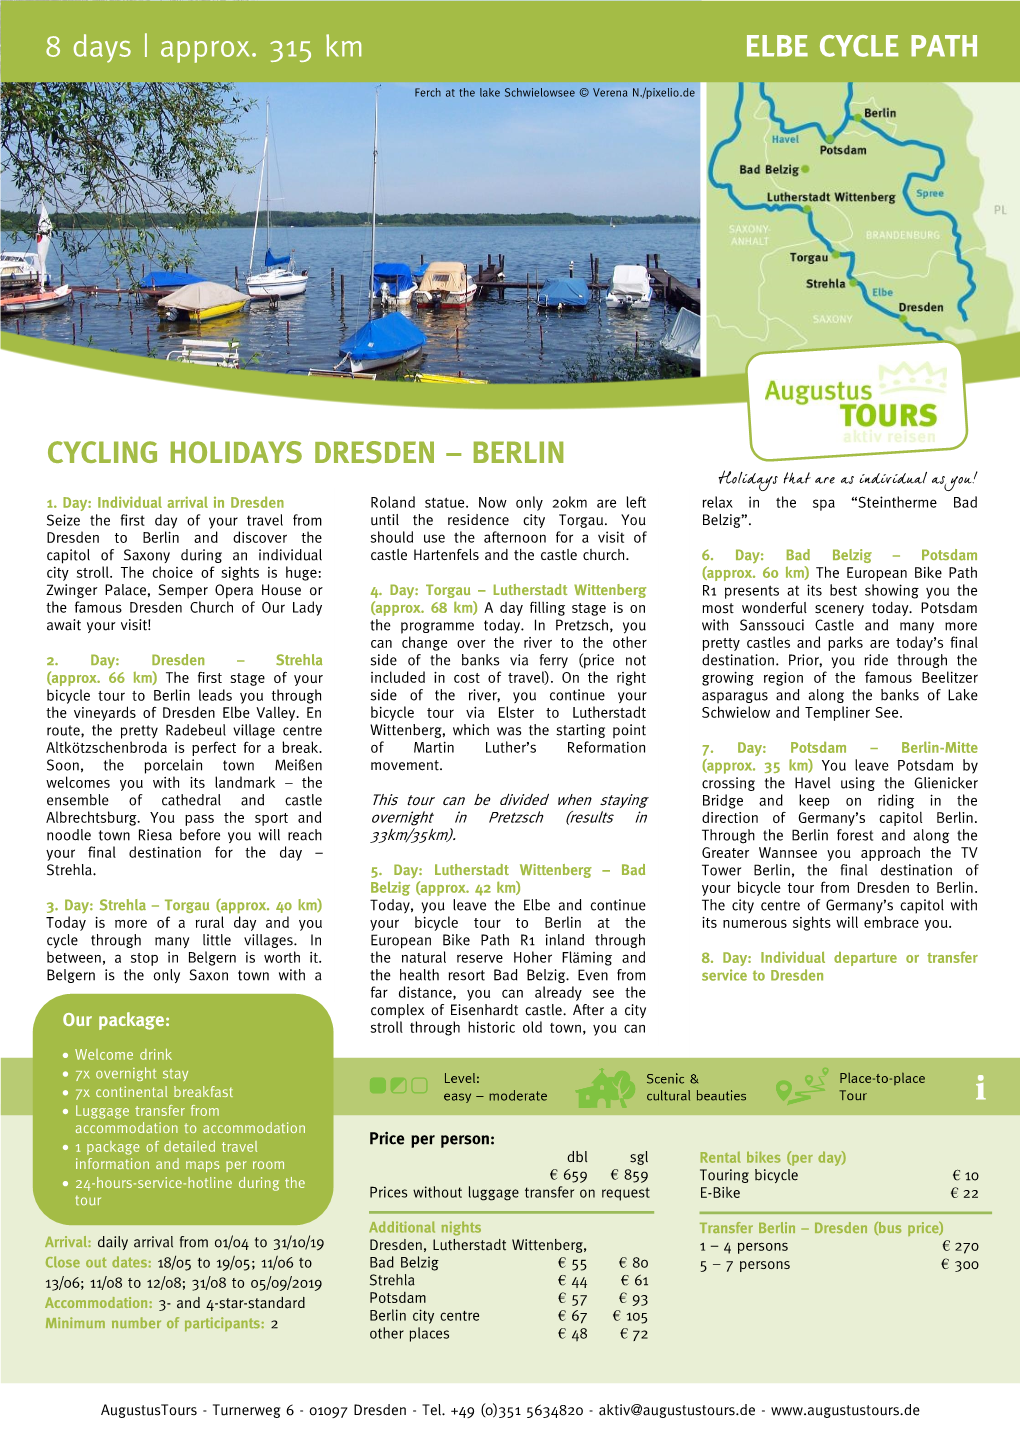 Approx. 315 Km ELBE CYCLE PATH CYCLING HOLIDAYS DRESDEN